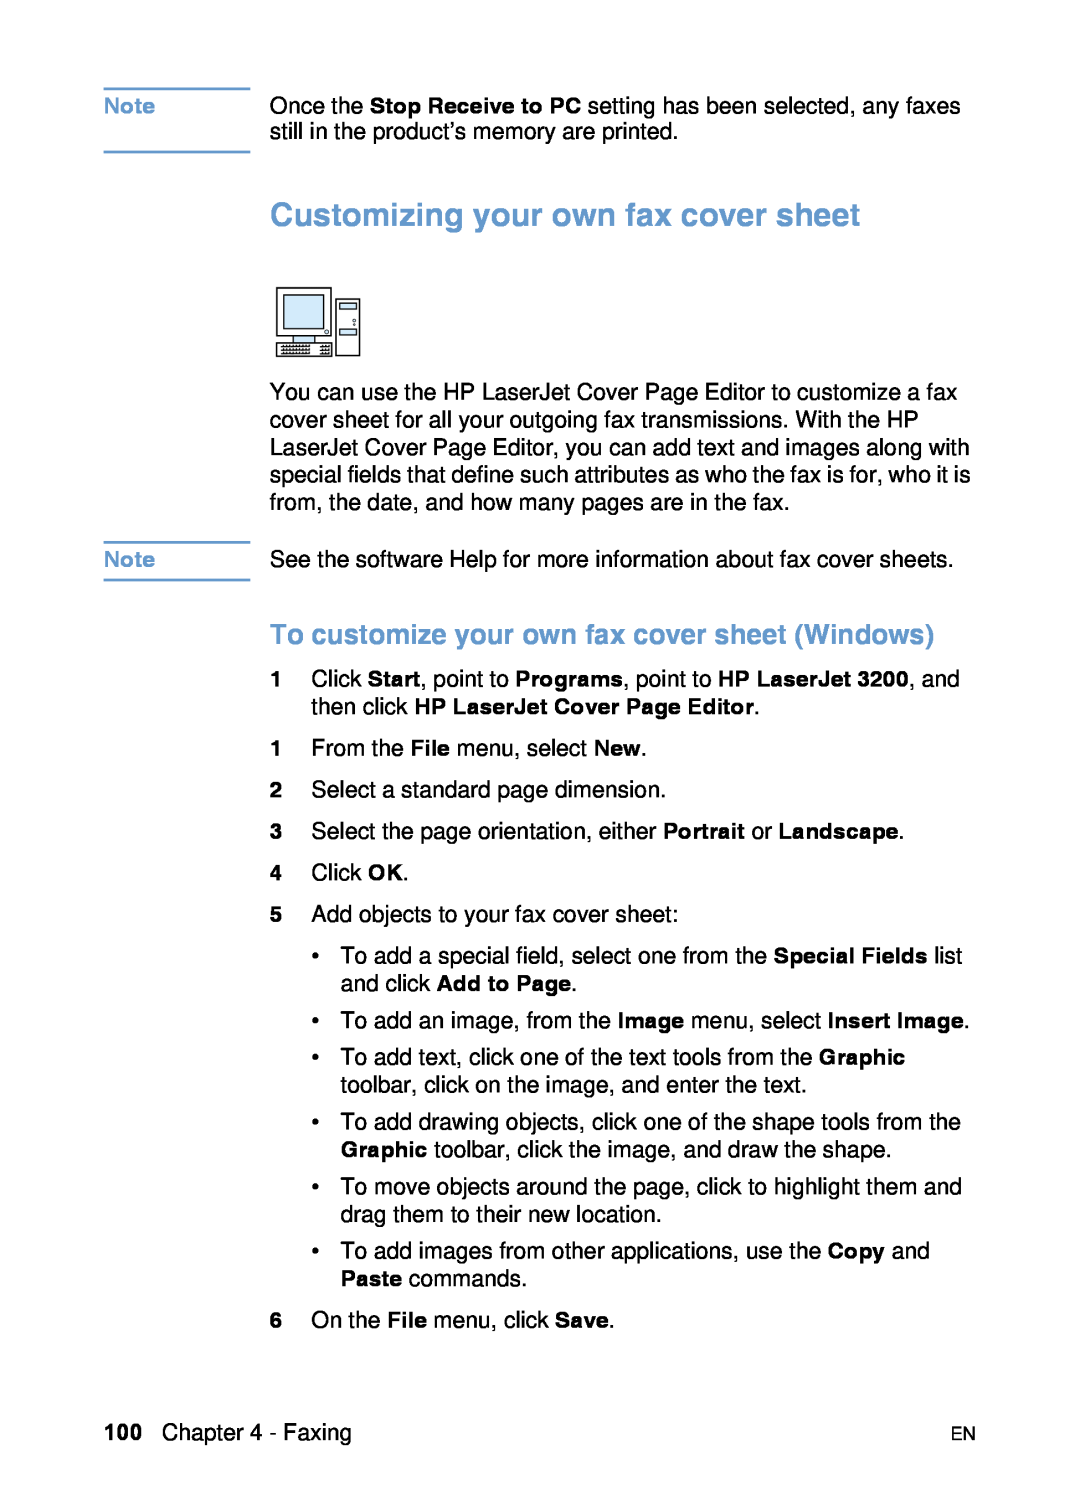 HP 3200 manual Customizing your own fax cover sheet, To customize your own fax cover sheet Windows 